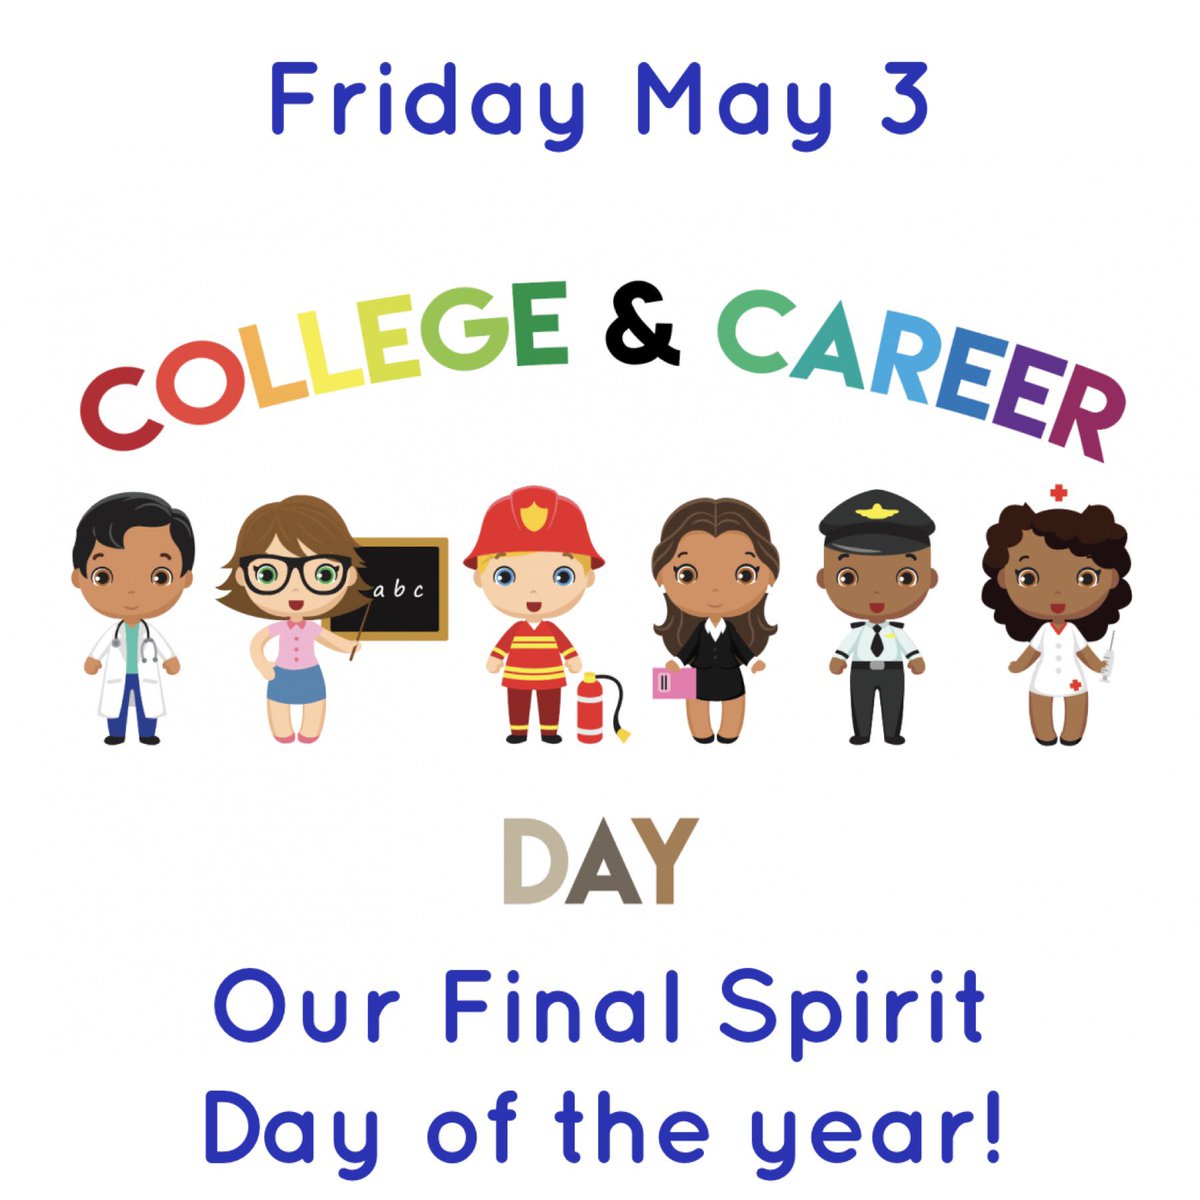 Check it out @EESpanthers this Friday May 3 is our last Spirit Day for the school year! Come dressed in your future career attire or represent your favorite college! #firstfriday #spiritday